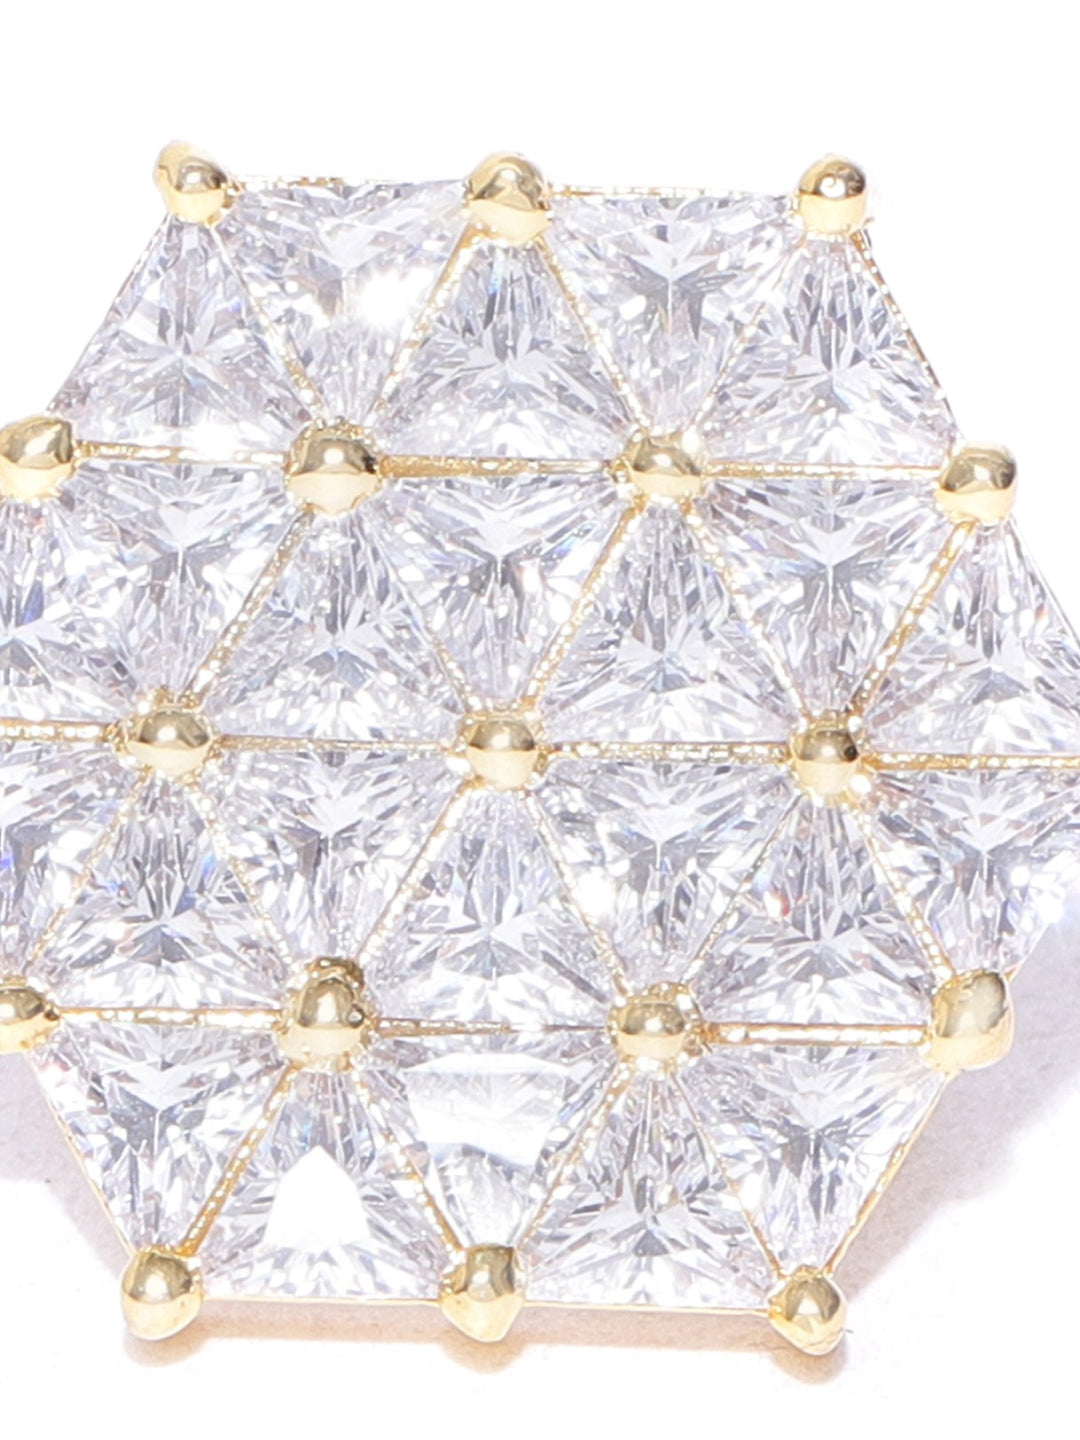 Gold-Plated American Diamond Studded Adjustable Ring in Geometric Pattern